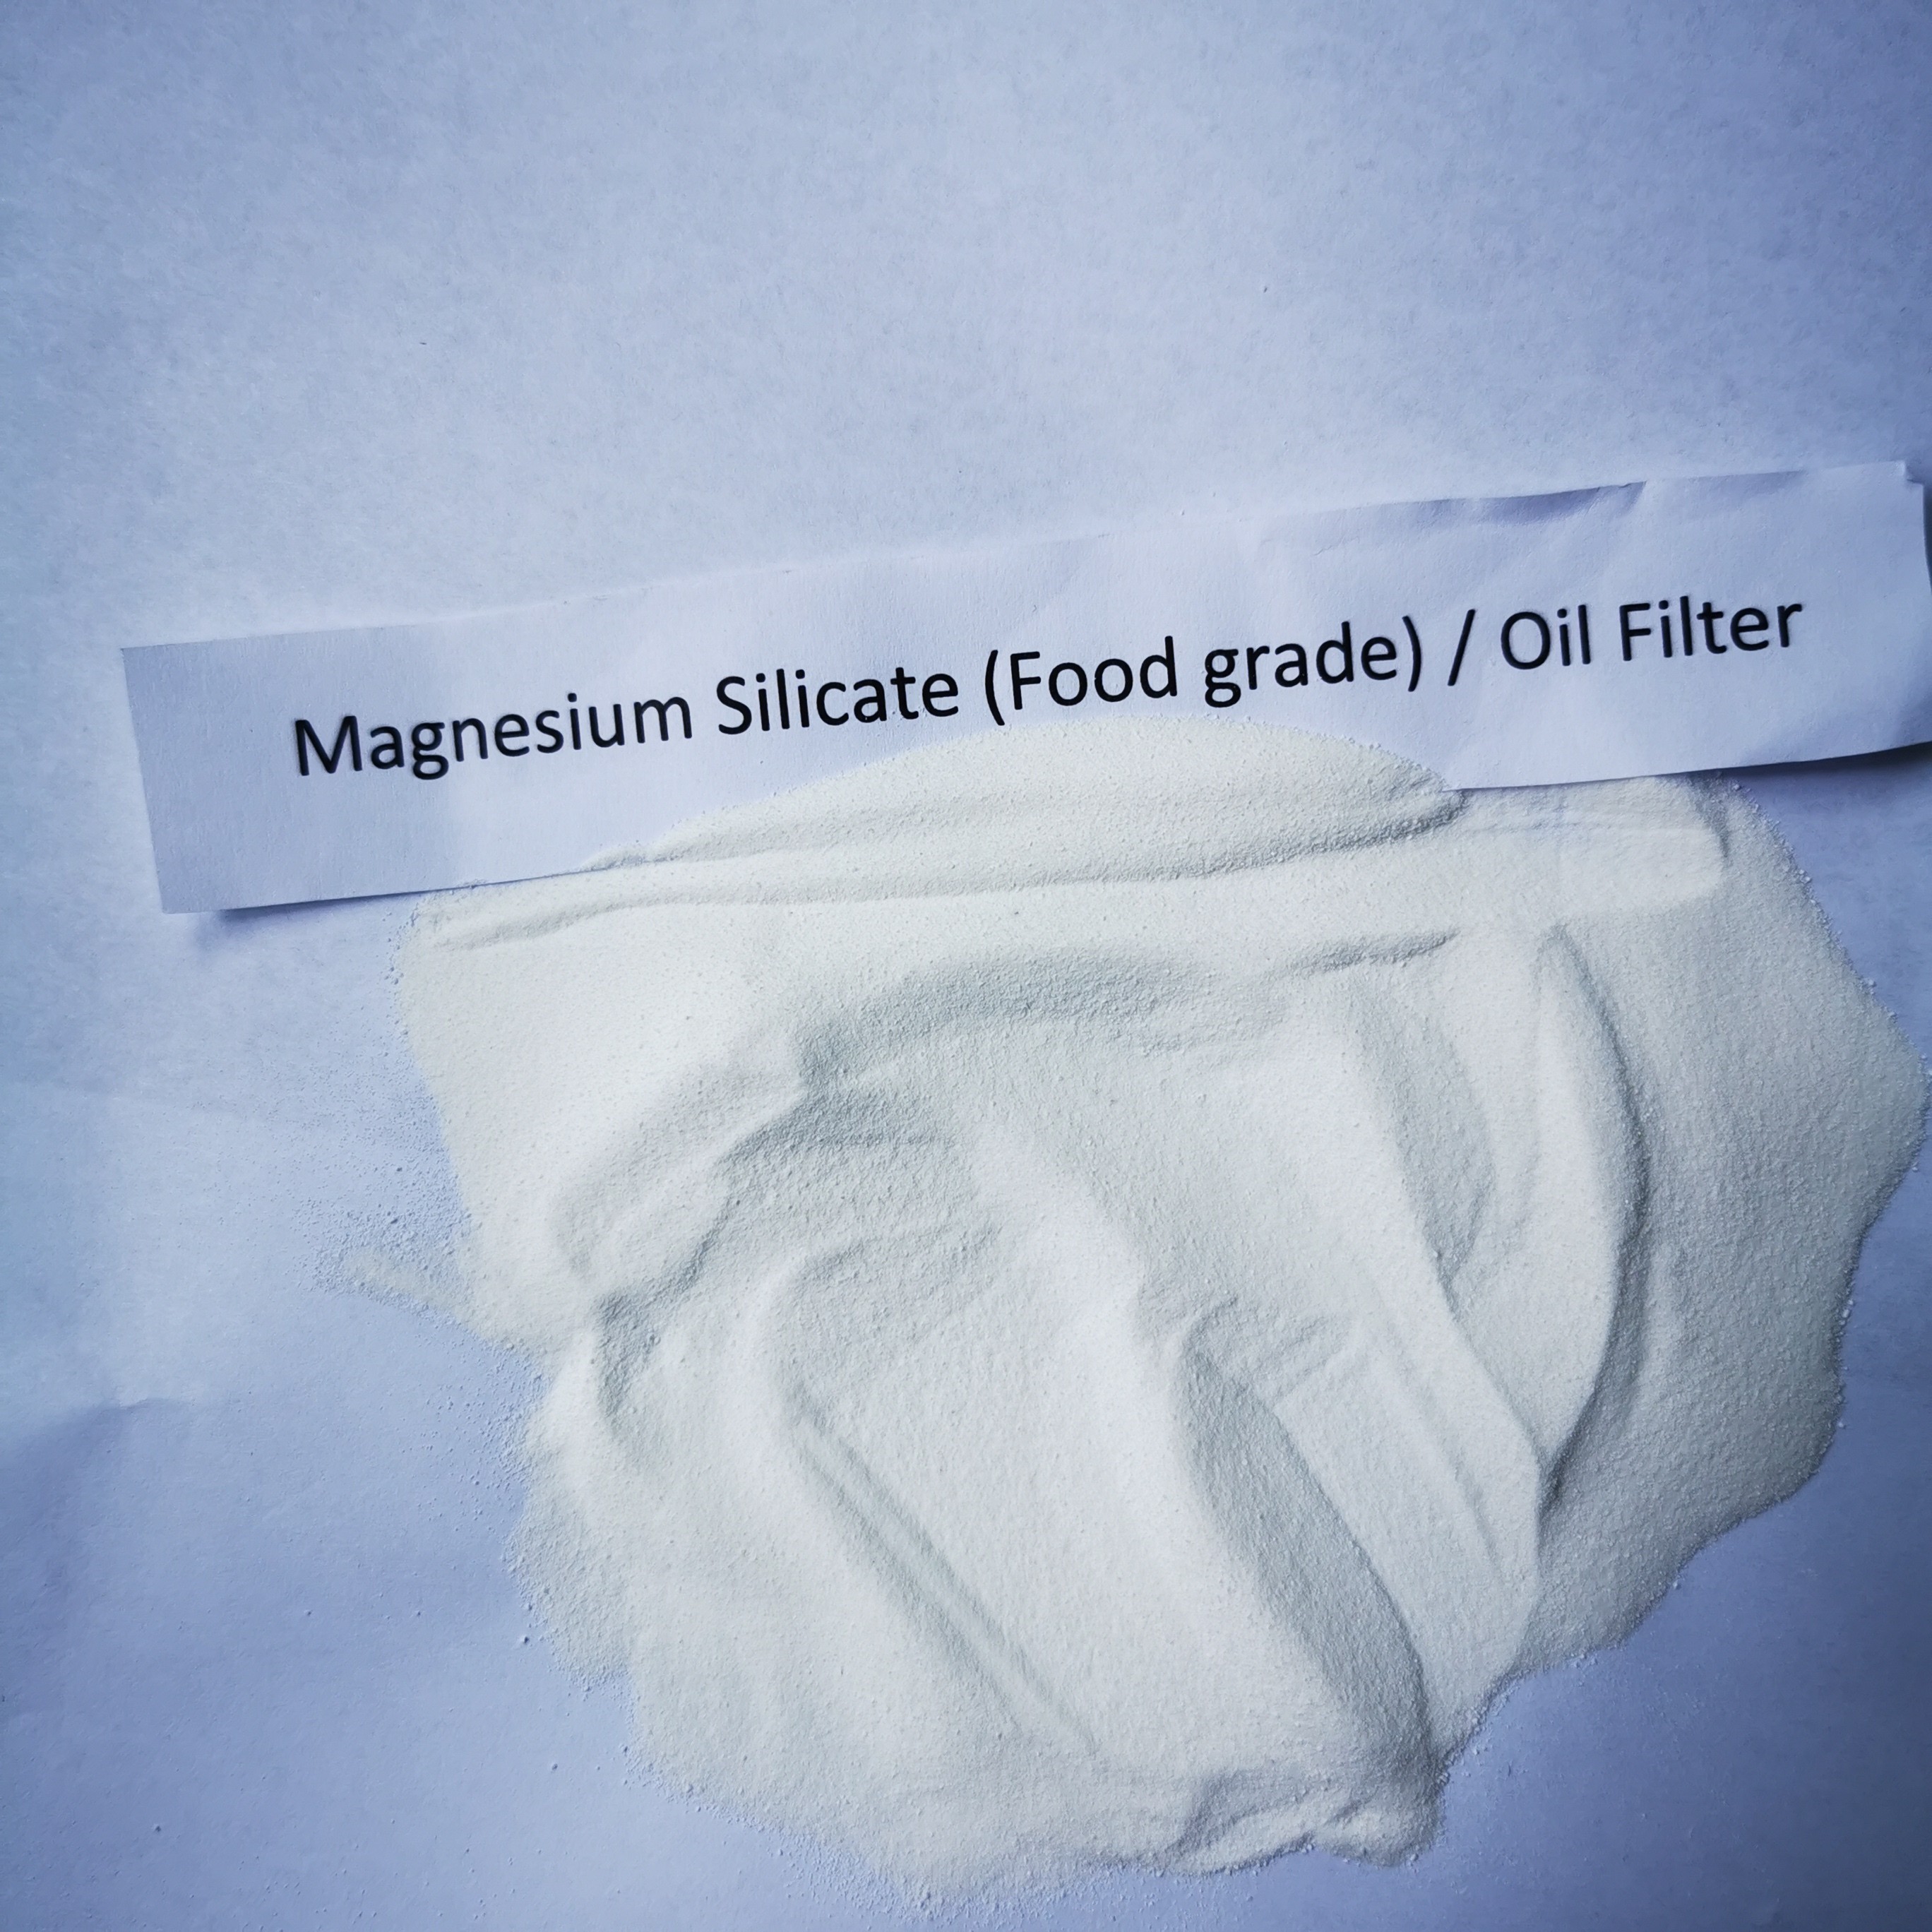 Oil Filter Powder Magnesium Silicate Save Oil